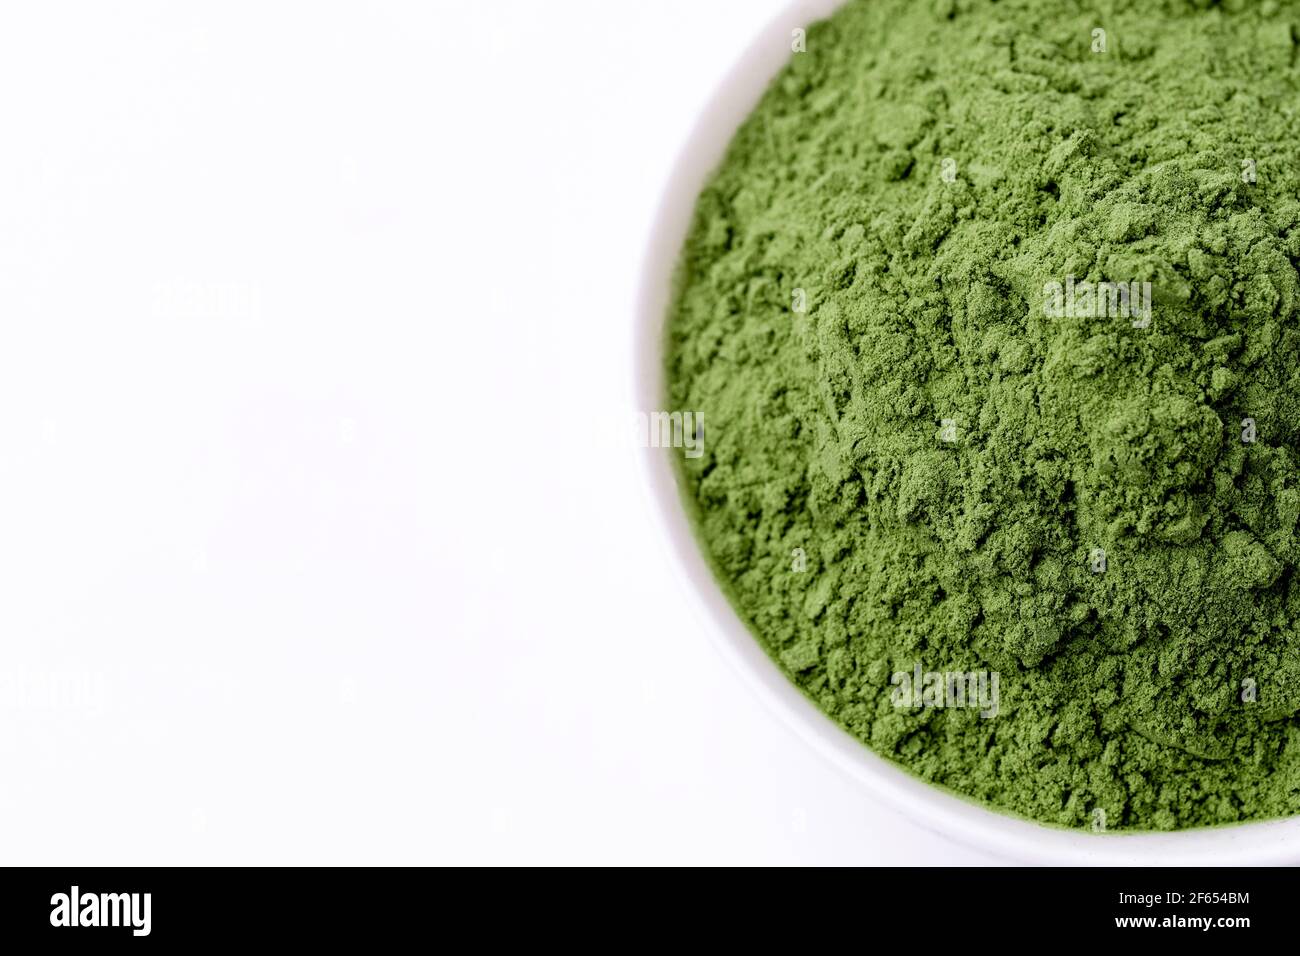 Green Barley Sprout grass and bowl of green detox powder isolated on white. Copyspace. Stock Photo